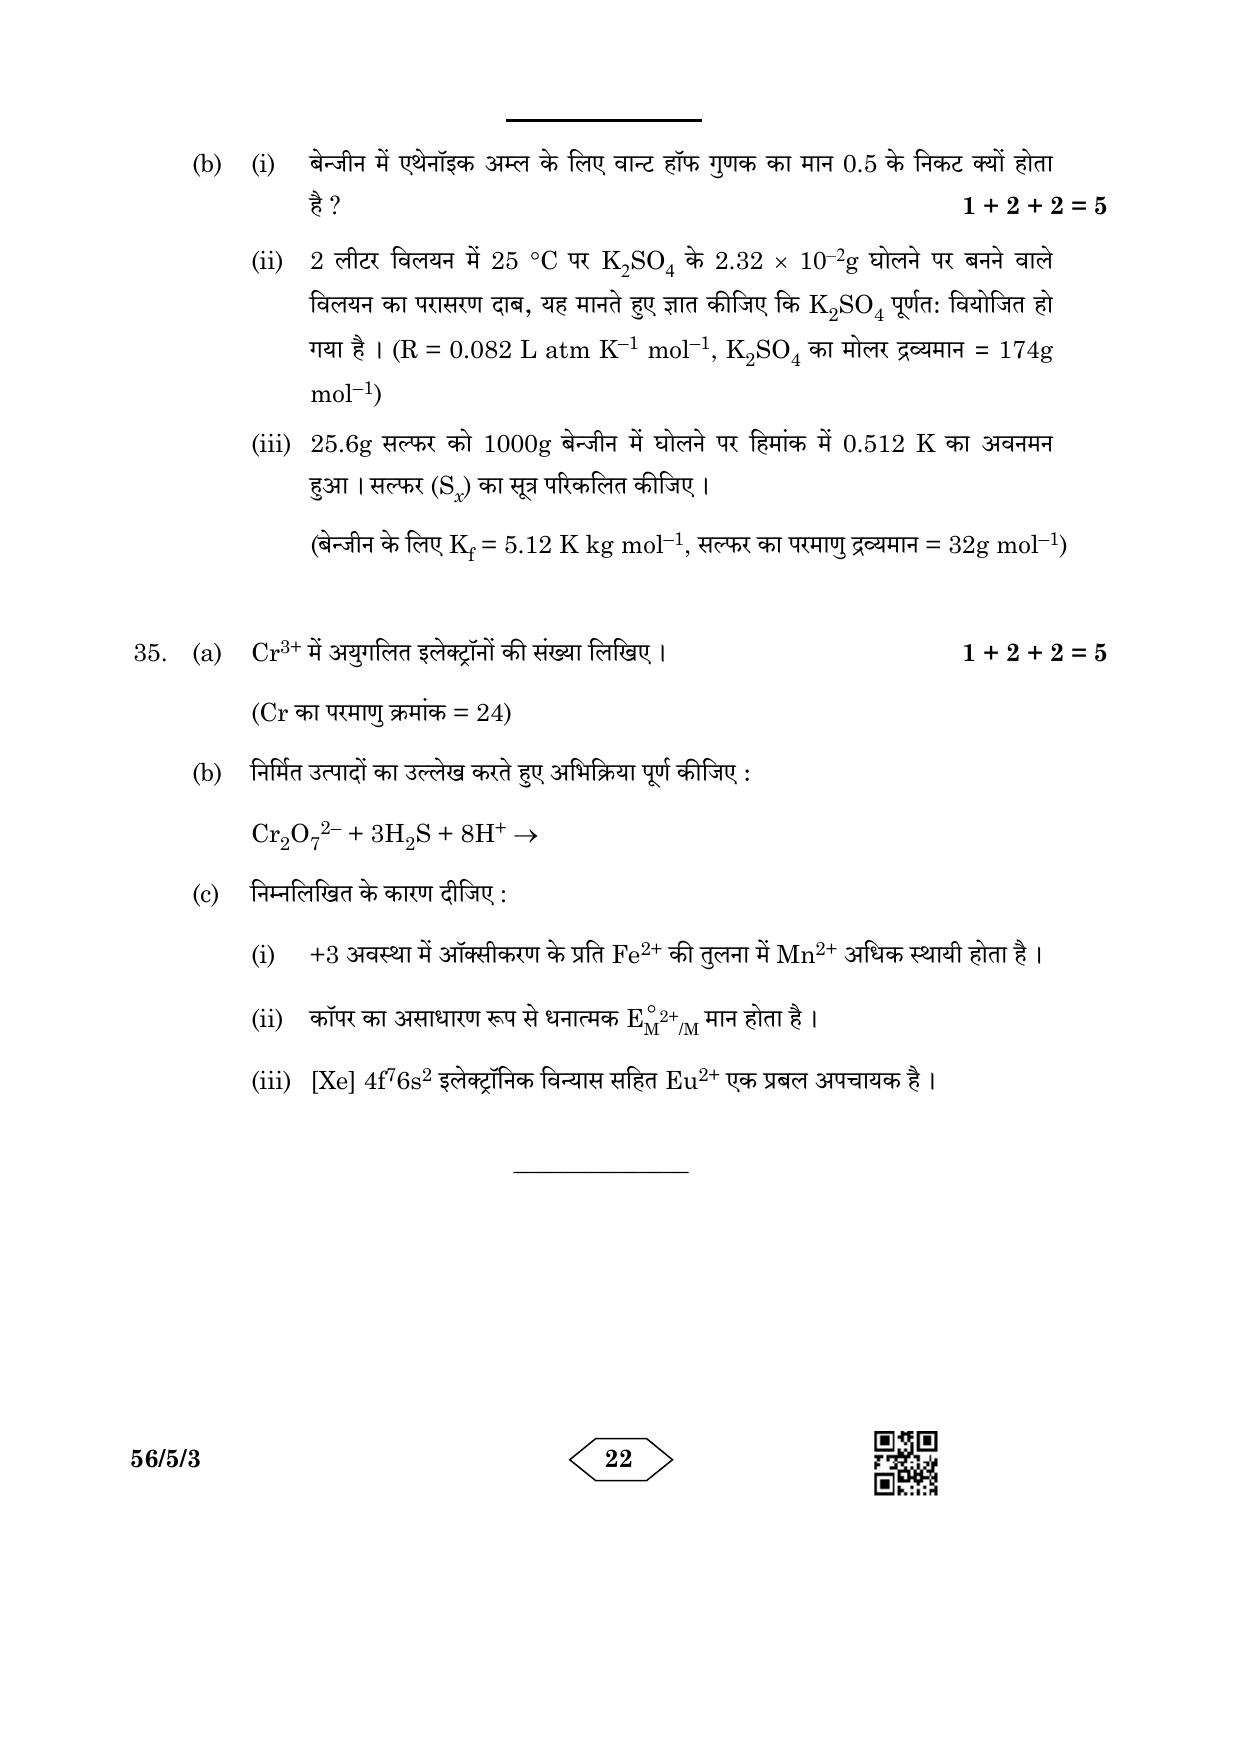 CBSE Class 12 56-5-3 Chemistry 2023 Question Paper - Page 22